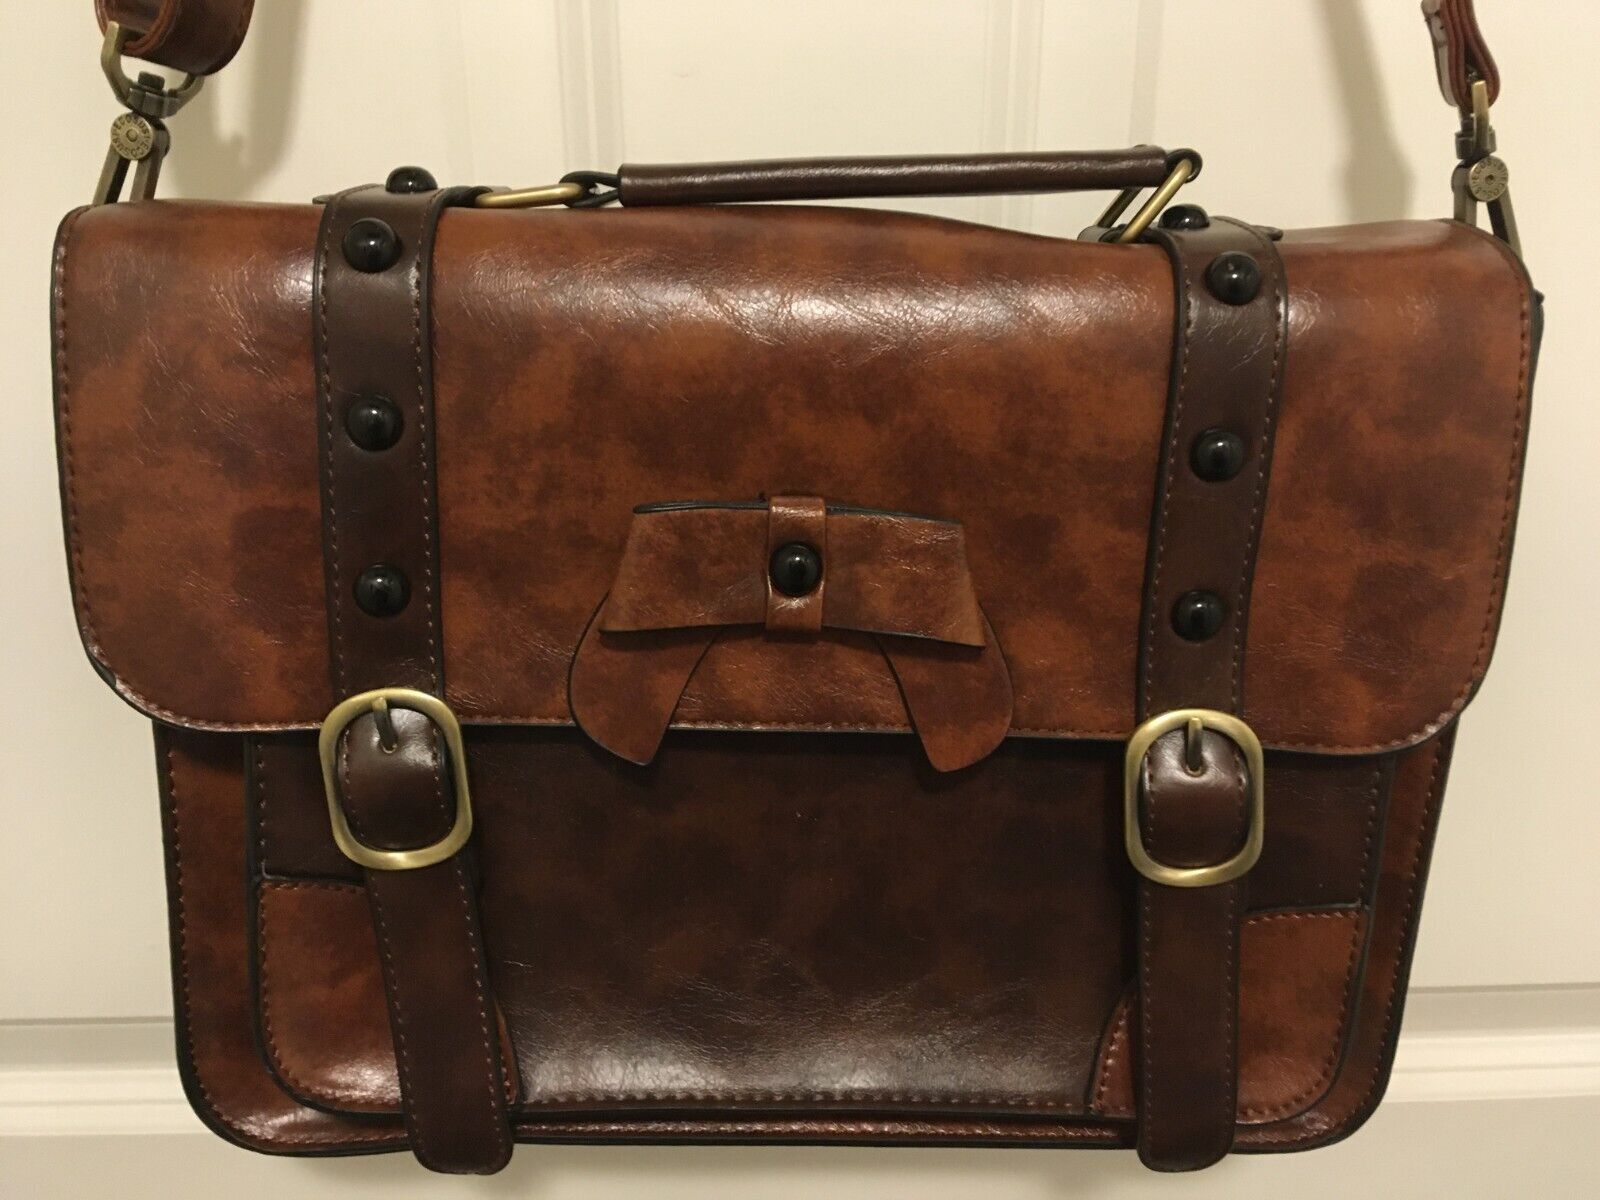 New Ecosusi Bag Leather New Laptop Briefcase Brown 13